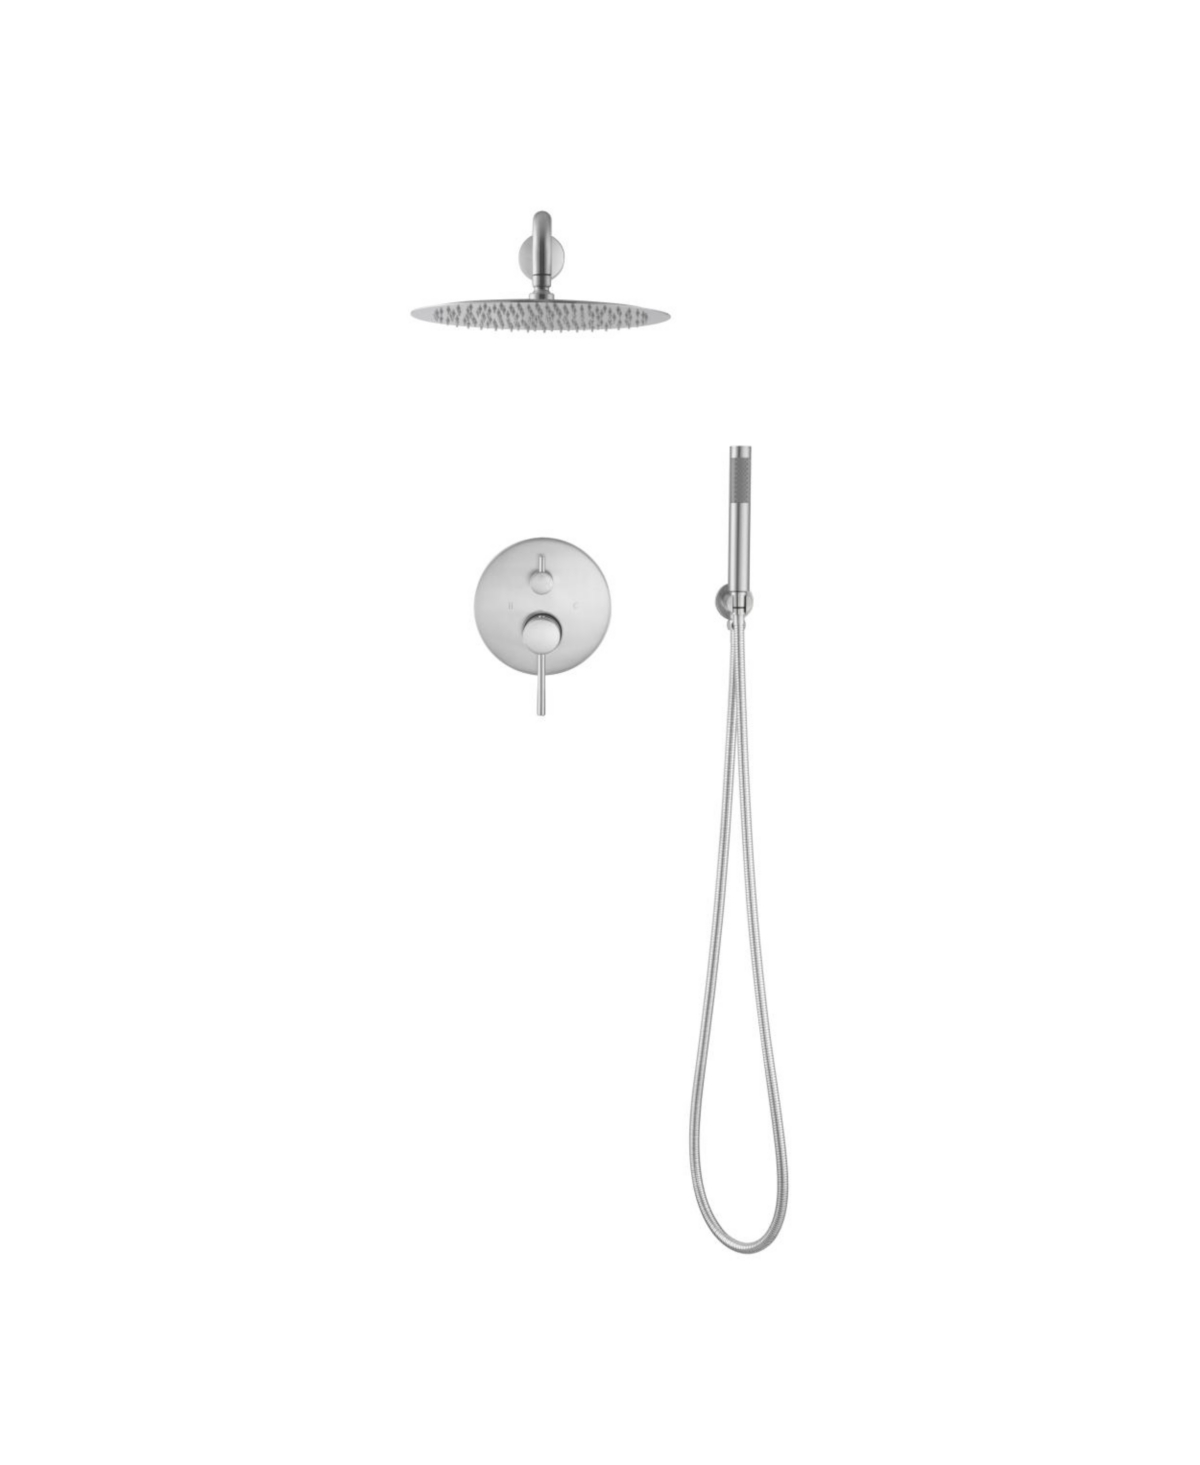 Shower System, Wall Mounted Shower Faucet Set For Bathroom With High Pressure 10 Stainless - Silver